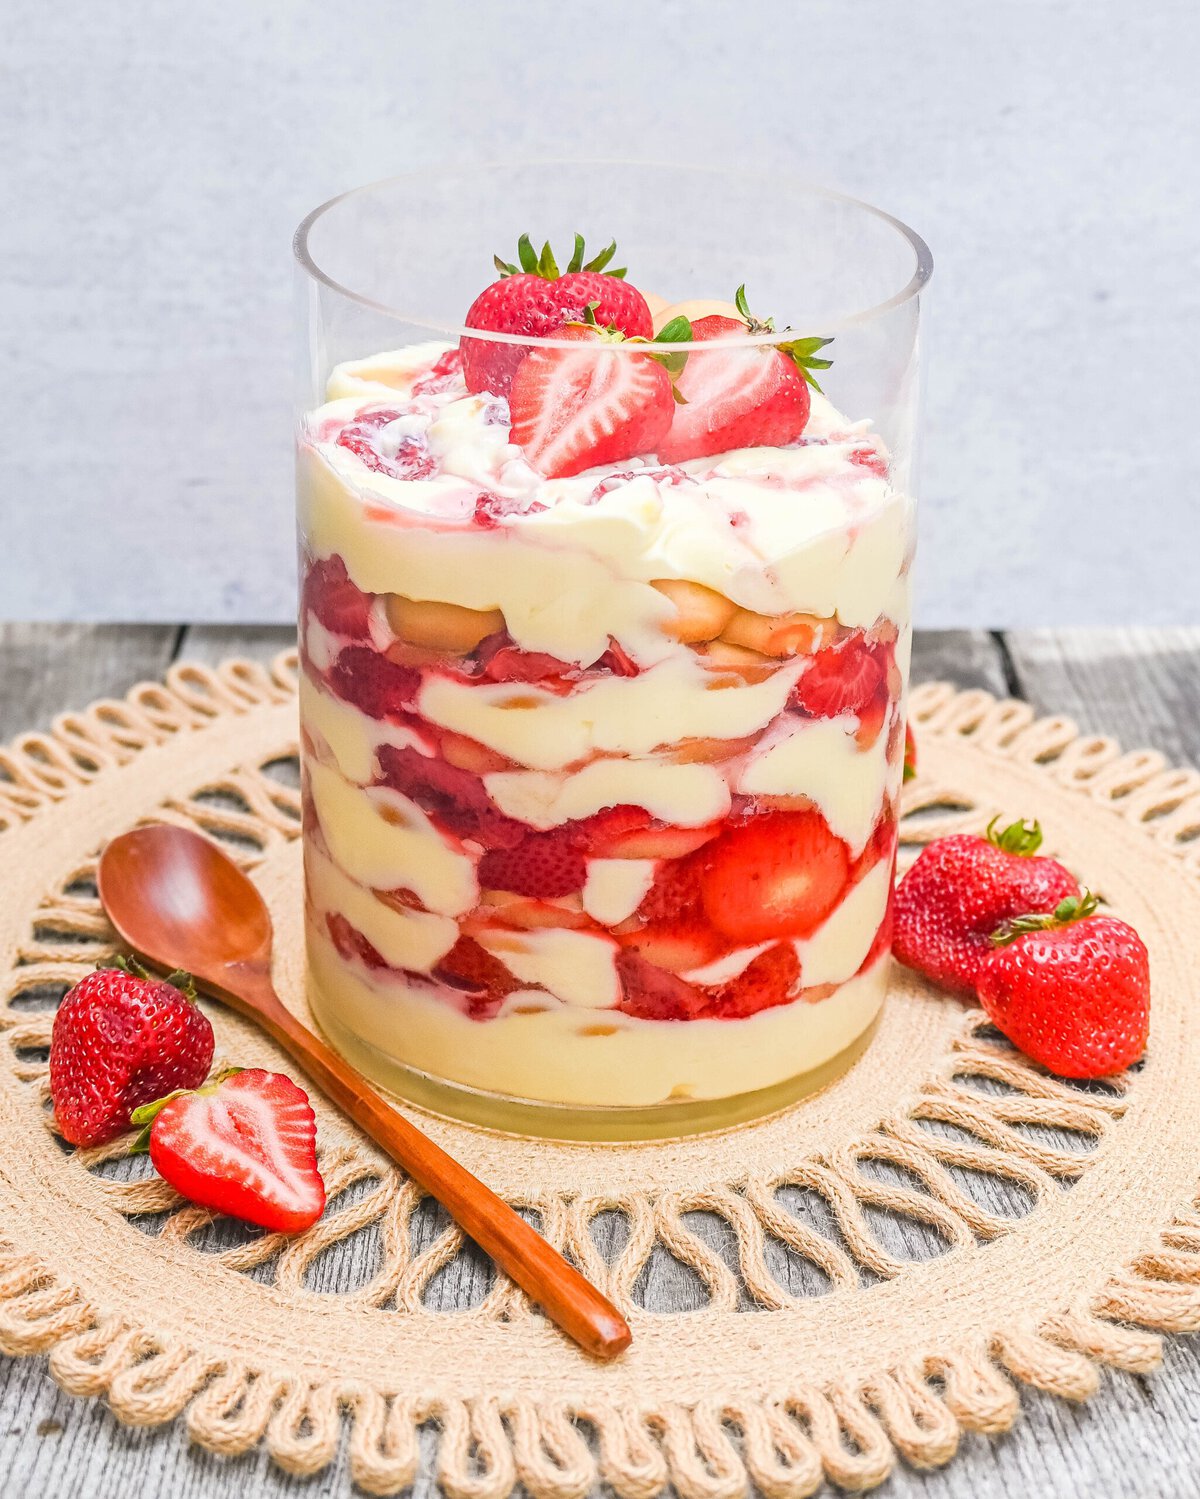 This Magnolia Bakery Strawberry Shortcake Pudding is such a quintessential summer dessert. It is made with fresh or roasted strawberries in a creamy vanilla pudding and whipped cream with Nilla wafers. This Strawberry Shortcake Pudding will be your favorite no-bake summer dessert recipe. This strawberry trifle will be a hit!